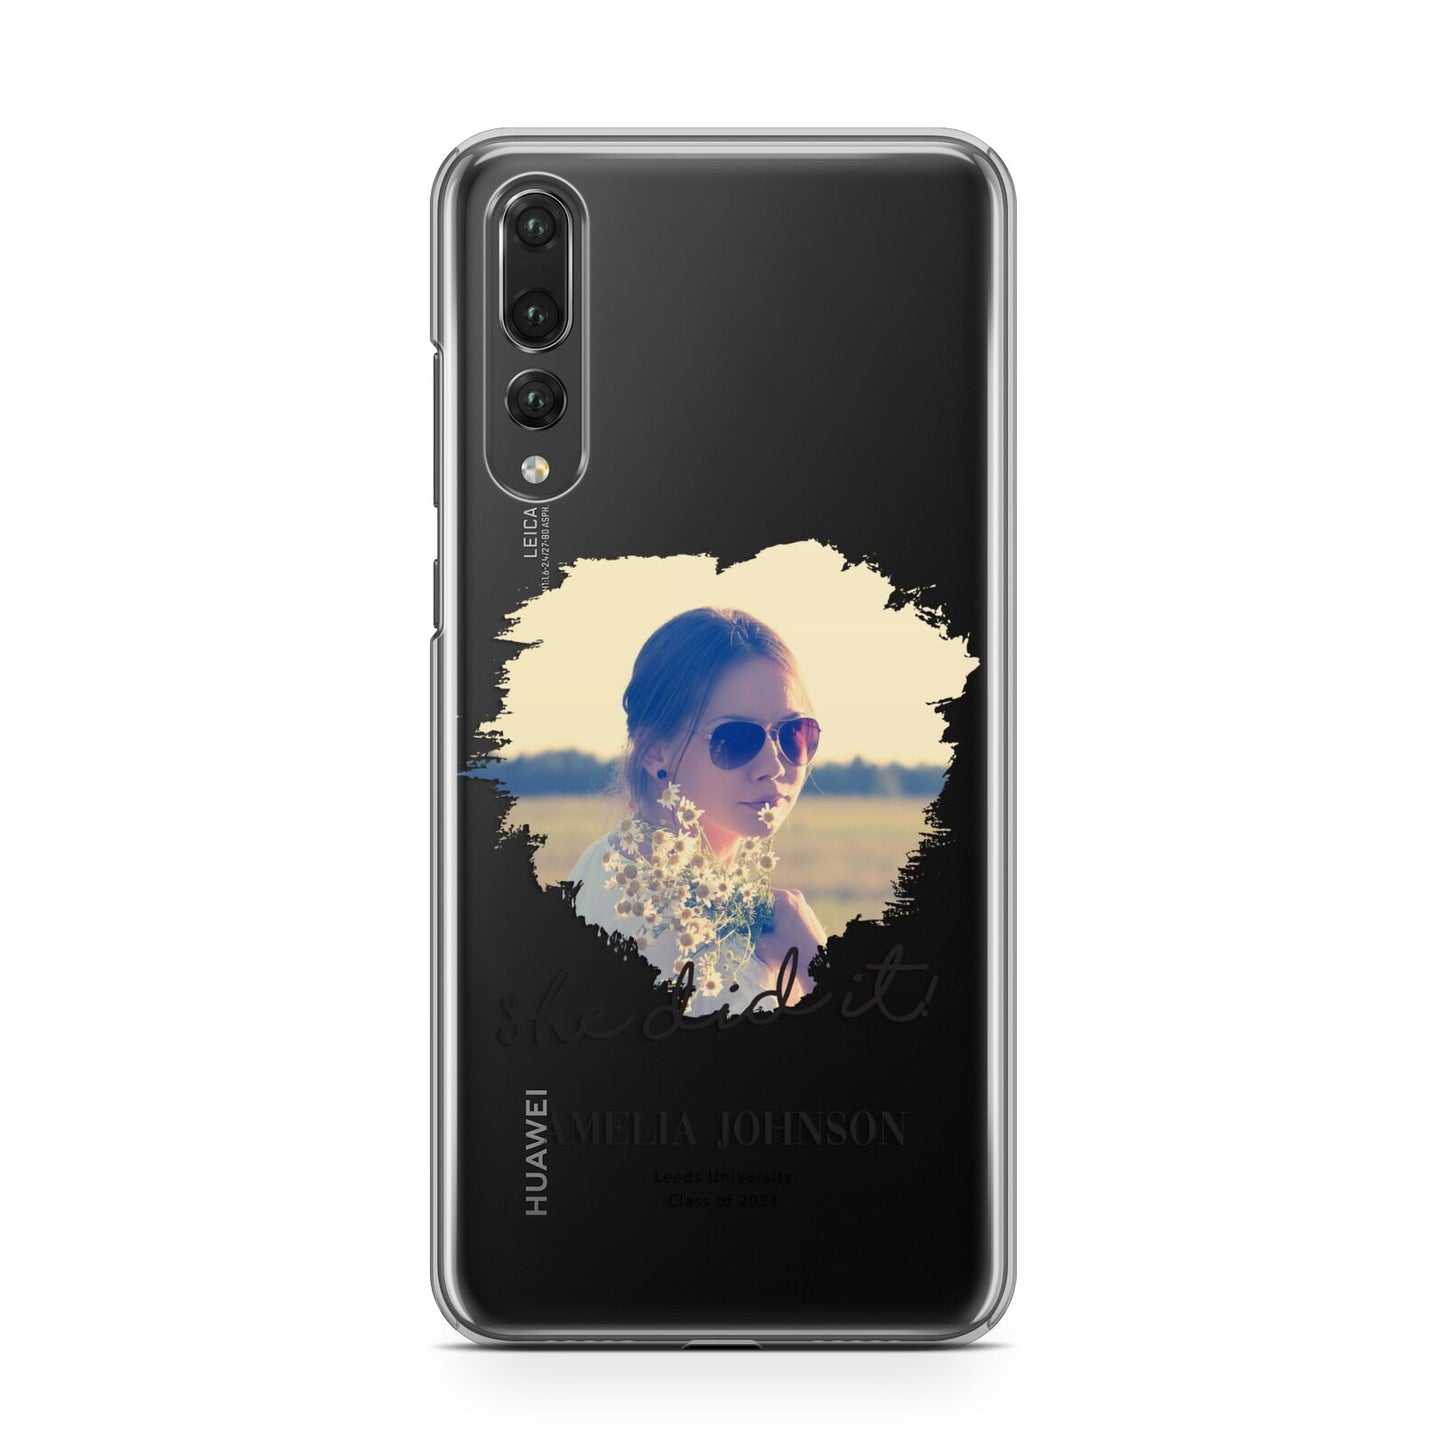 She Did It Graduation Photo with Name Huawei P20 Pro Phone Case